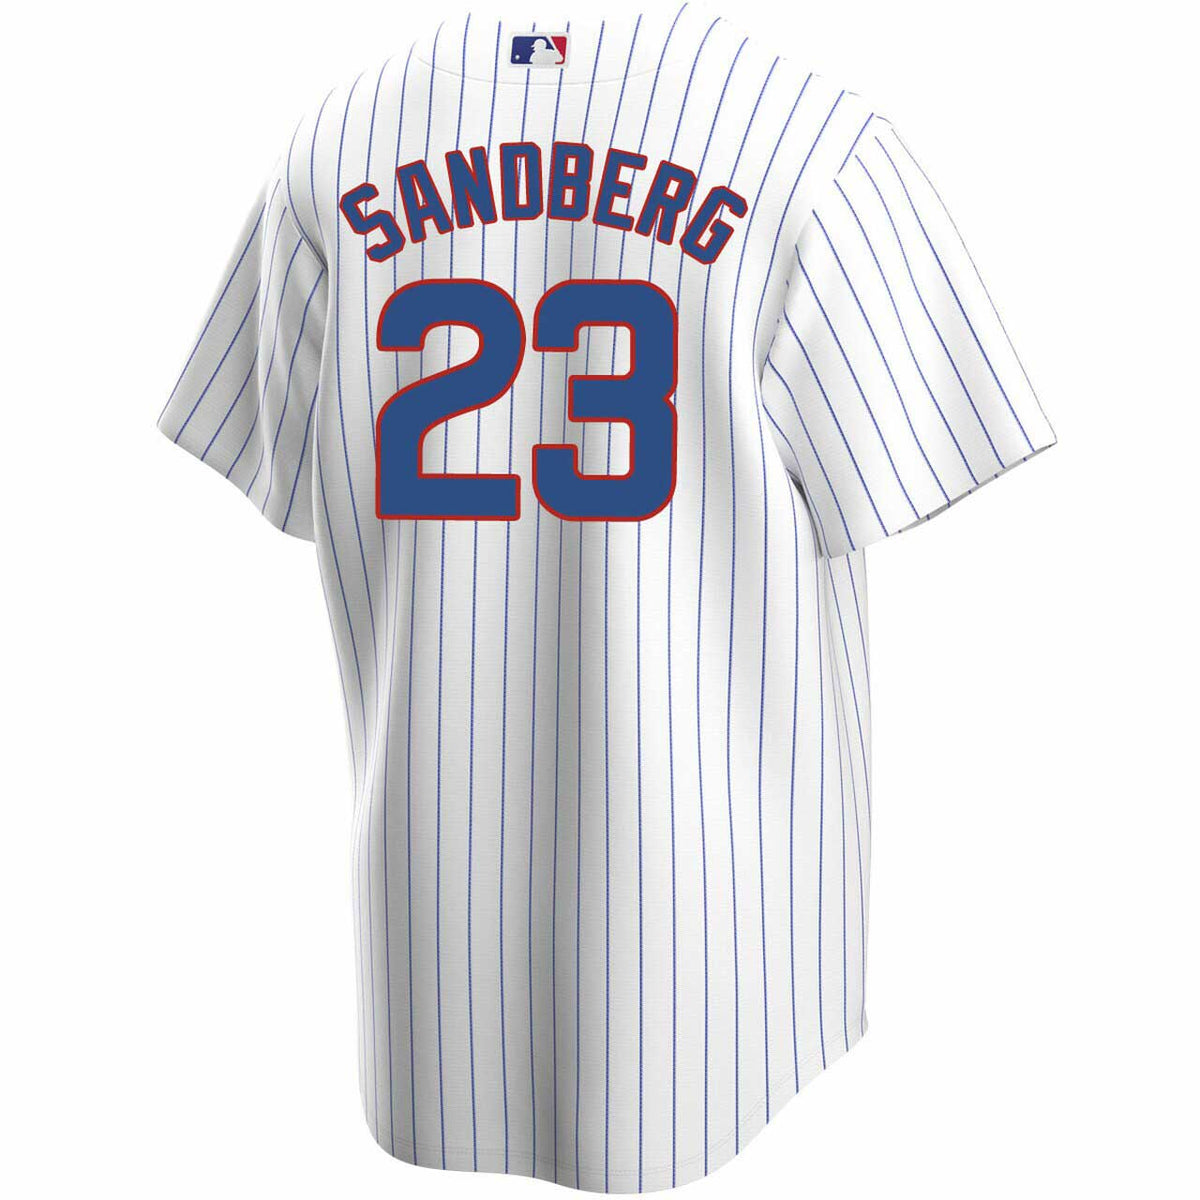 Chicago Cubs Customized Youth Nike Home Replica Cool Base Jersey X-Large = 18-20